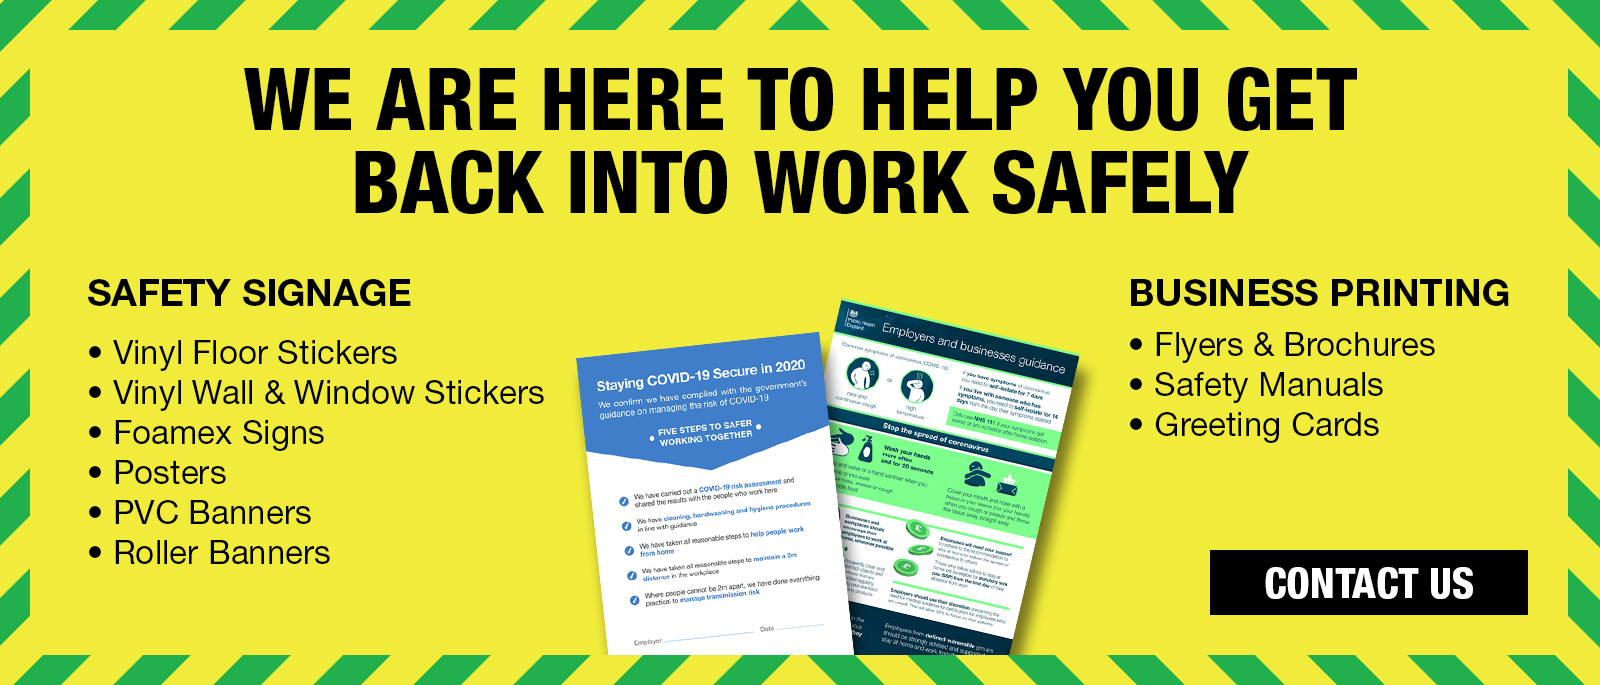 We are here to help you get back into work safely